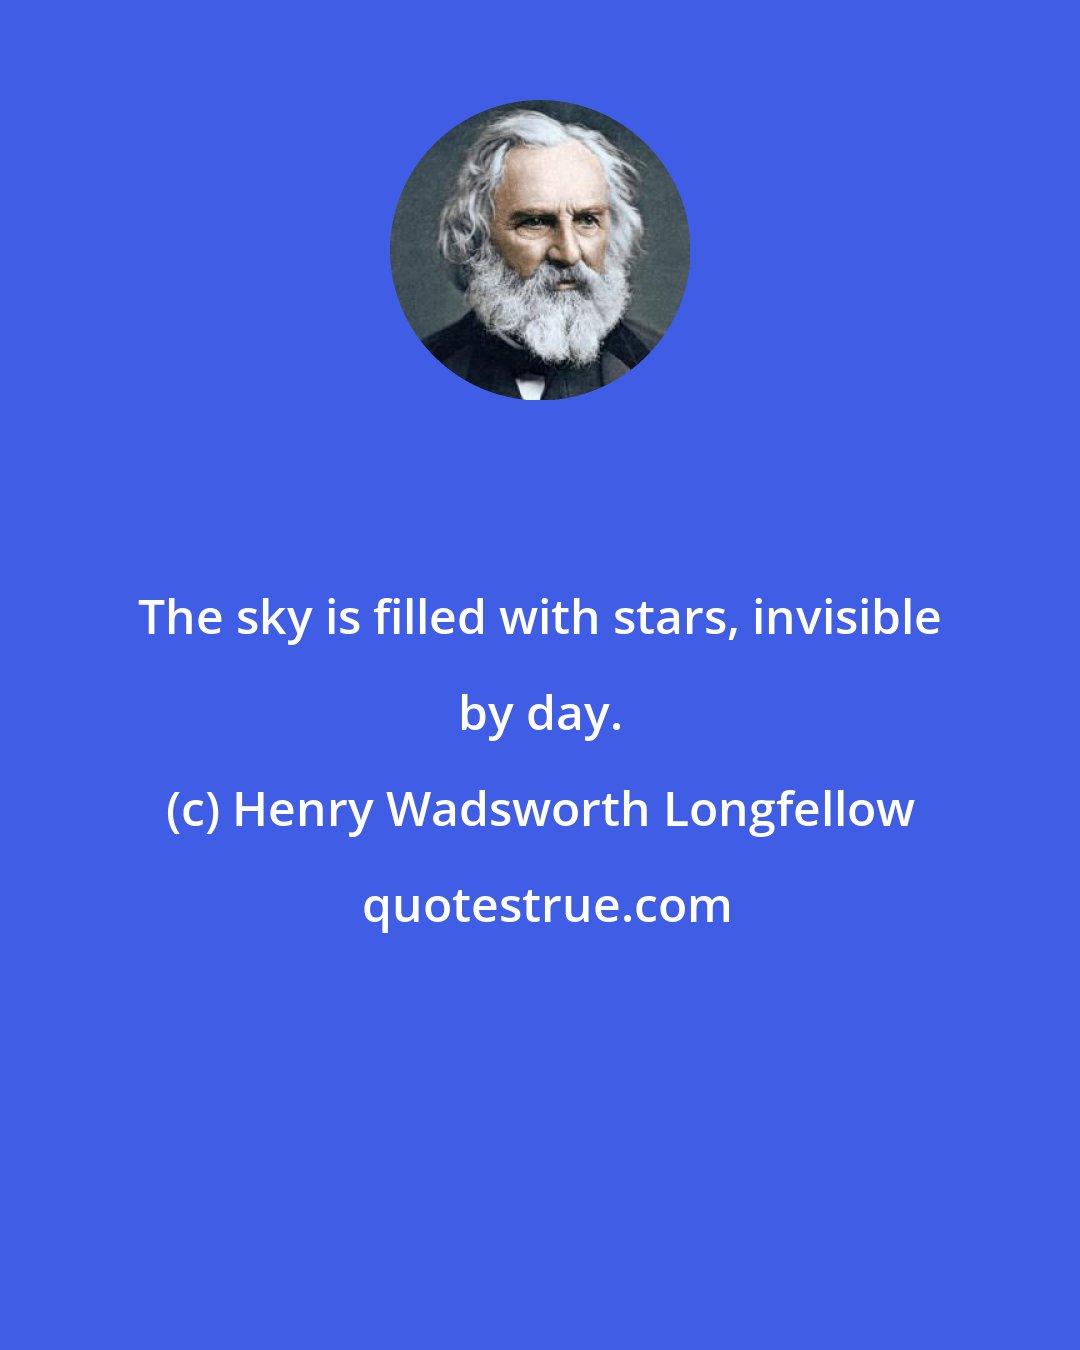 Henry Wadsworth Longfellow: The sky is filled with stars, invisible by day.